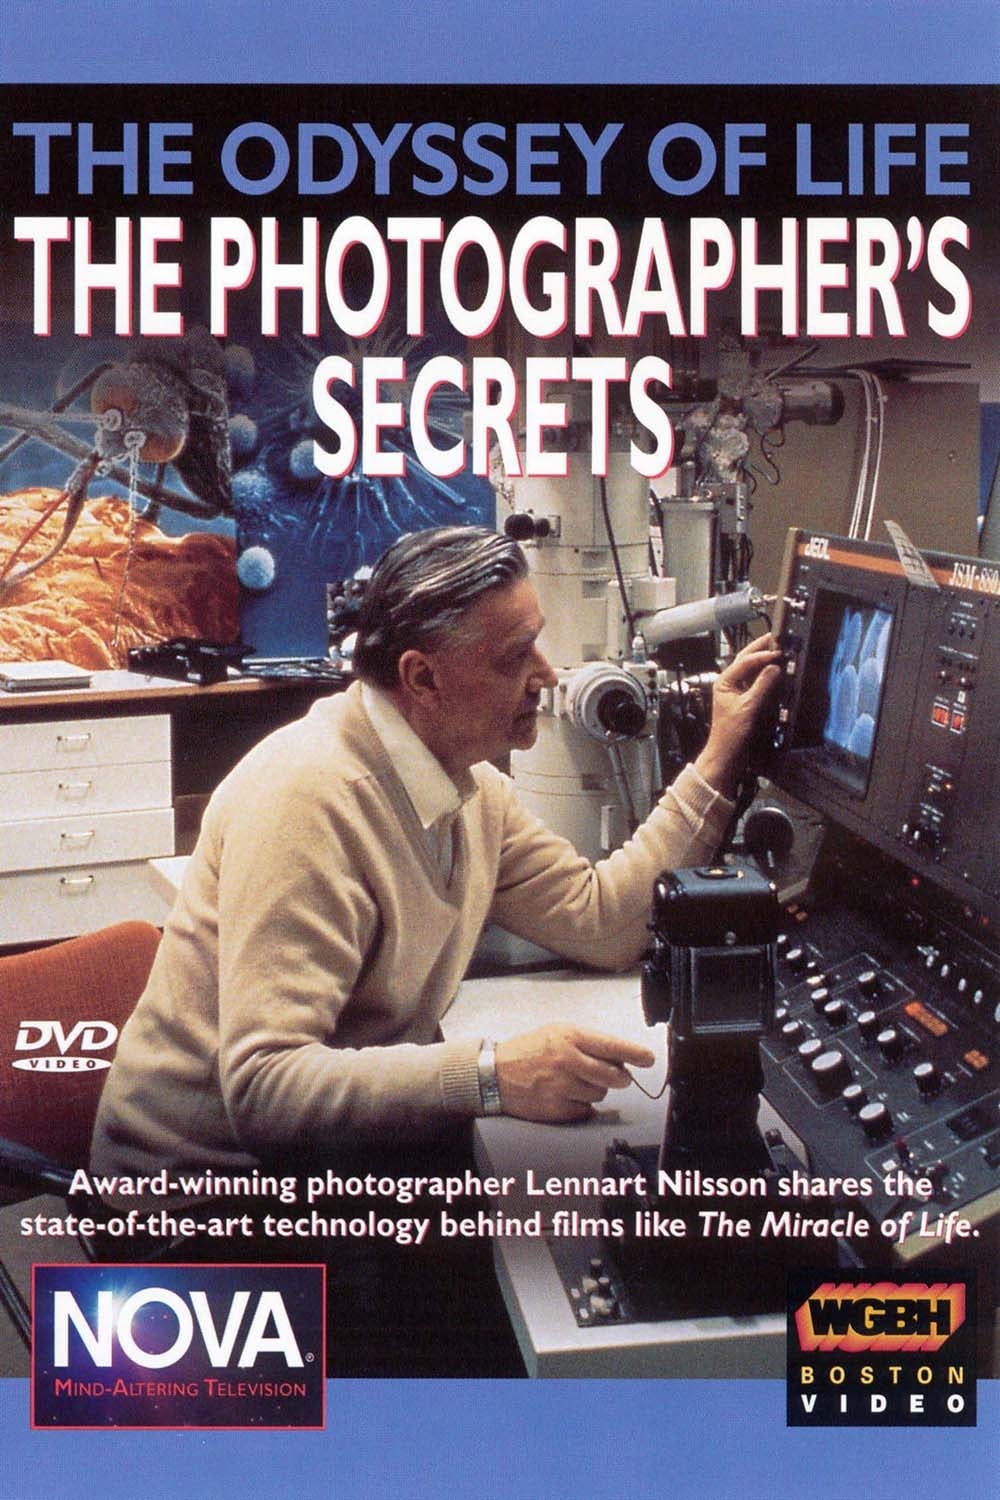 The Odyssey of Life - The Photographer's Secrets